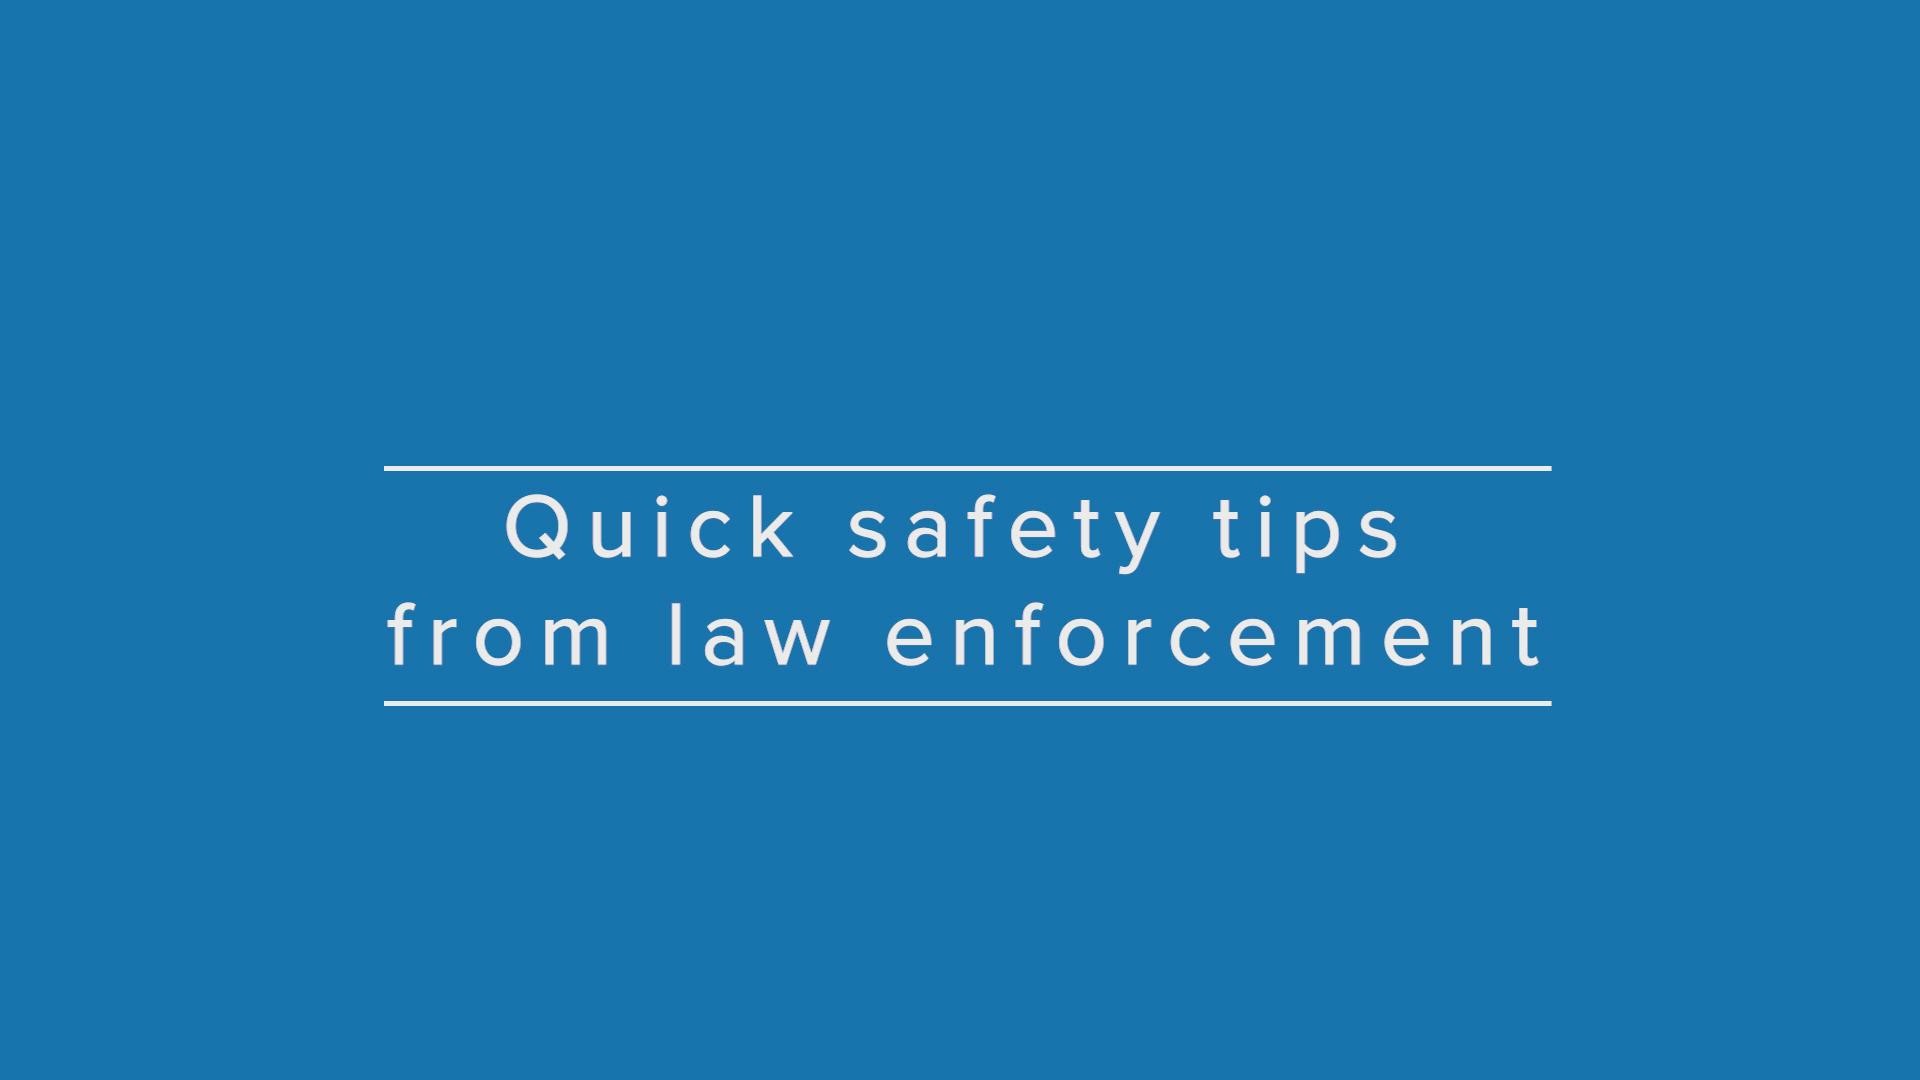 Here are some tips from law enforcement to keep yourself safe in various situations.